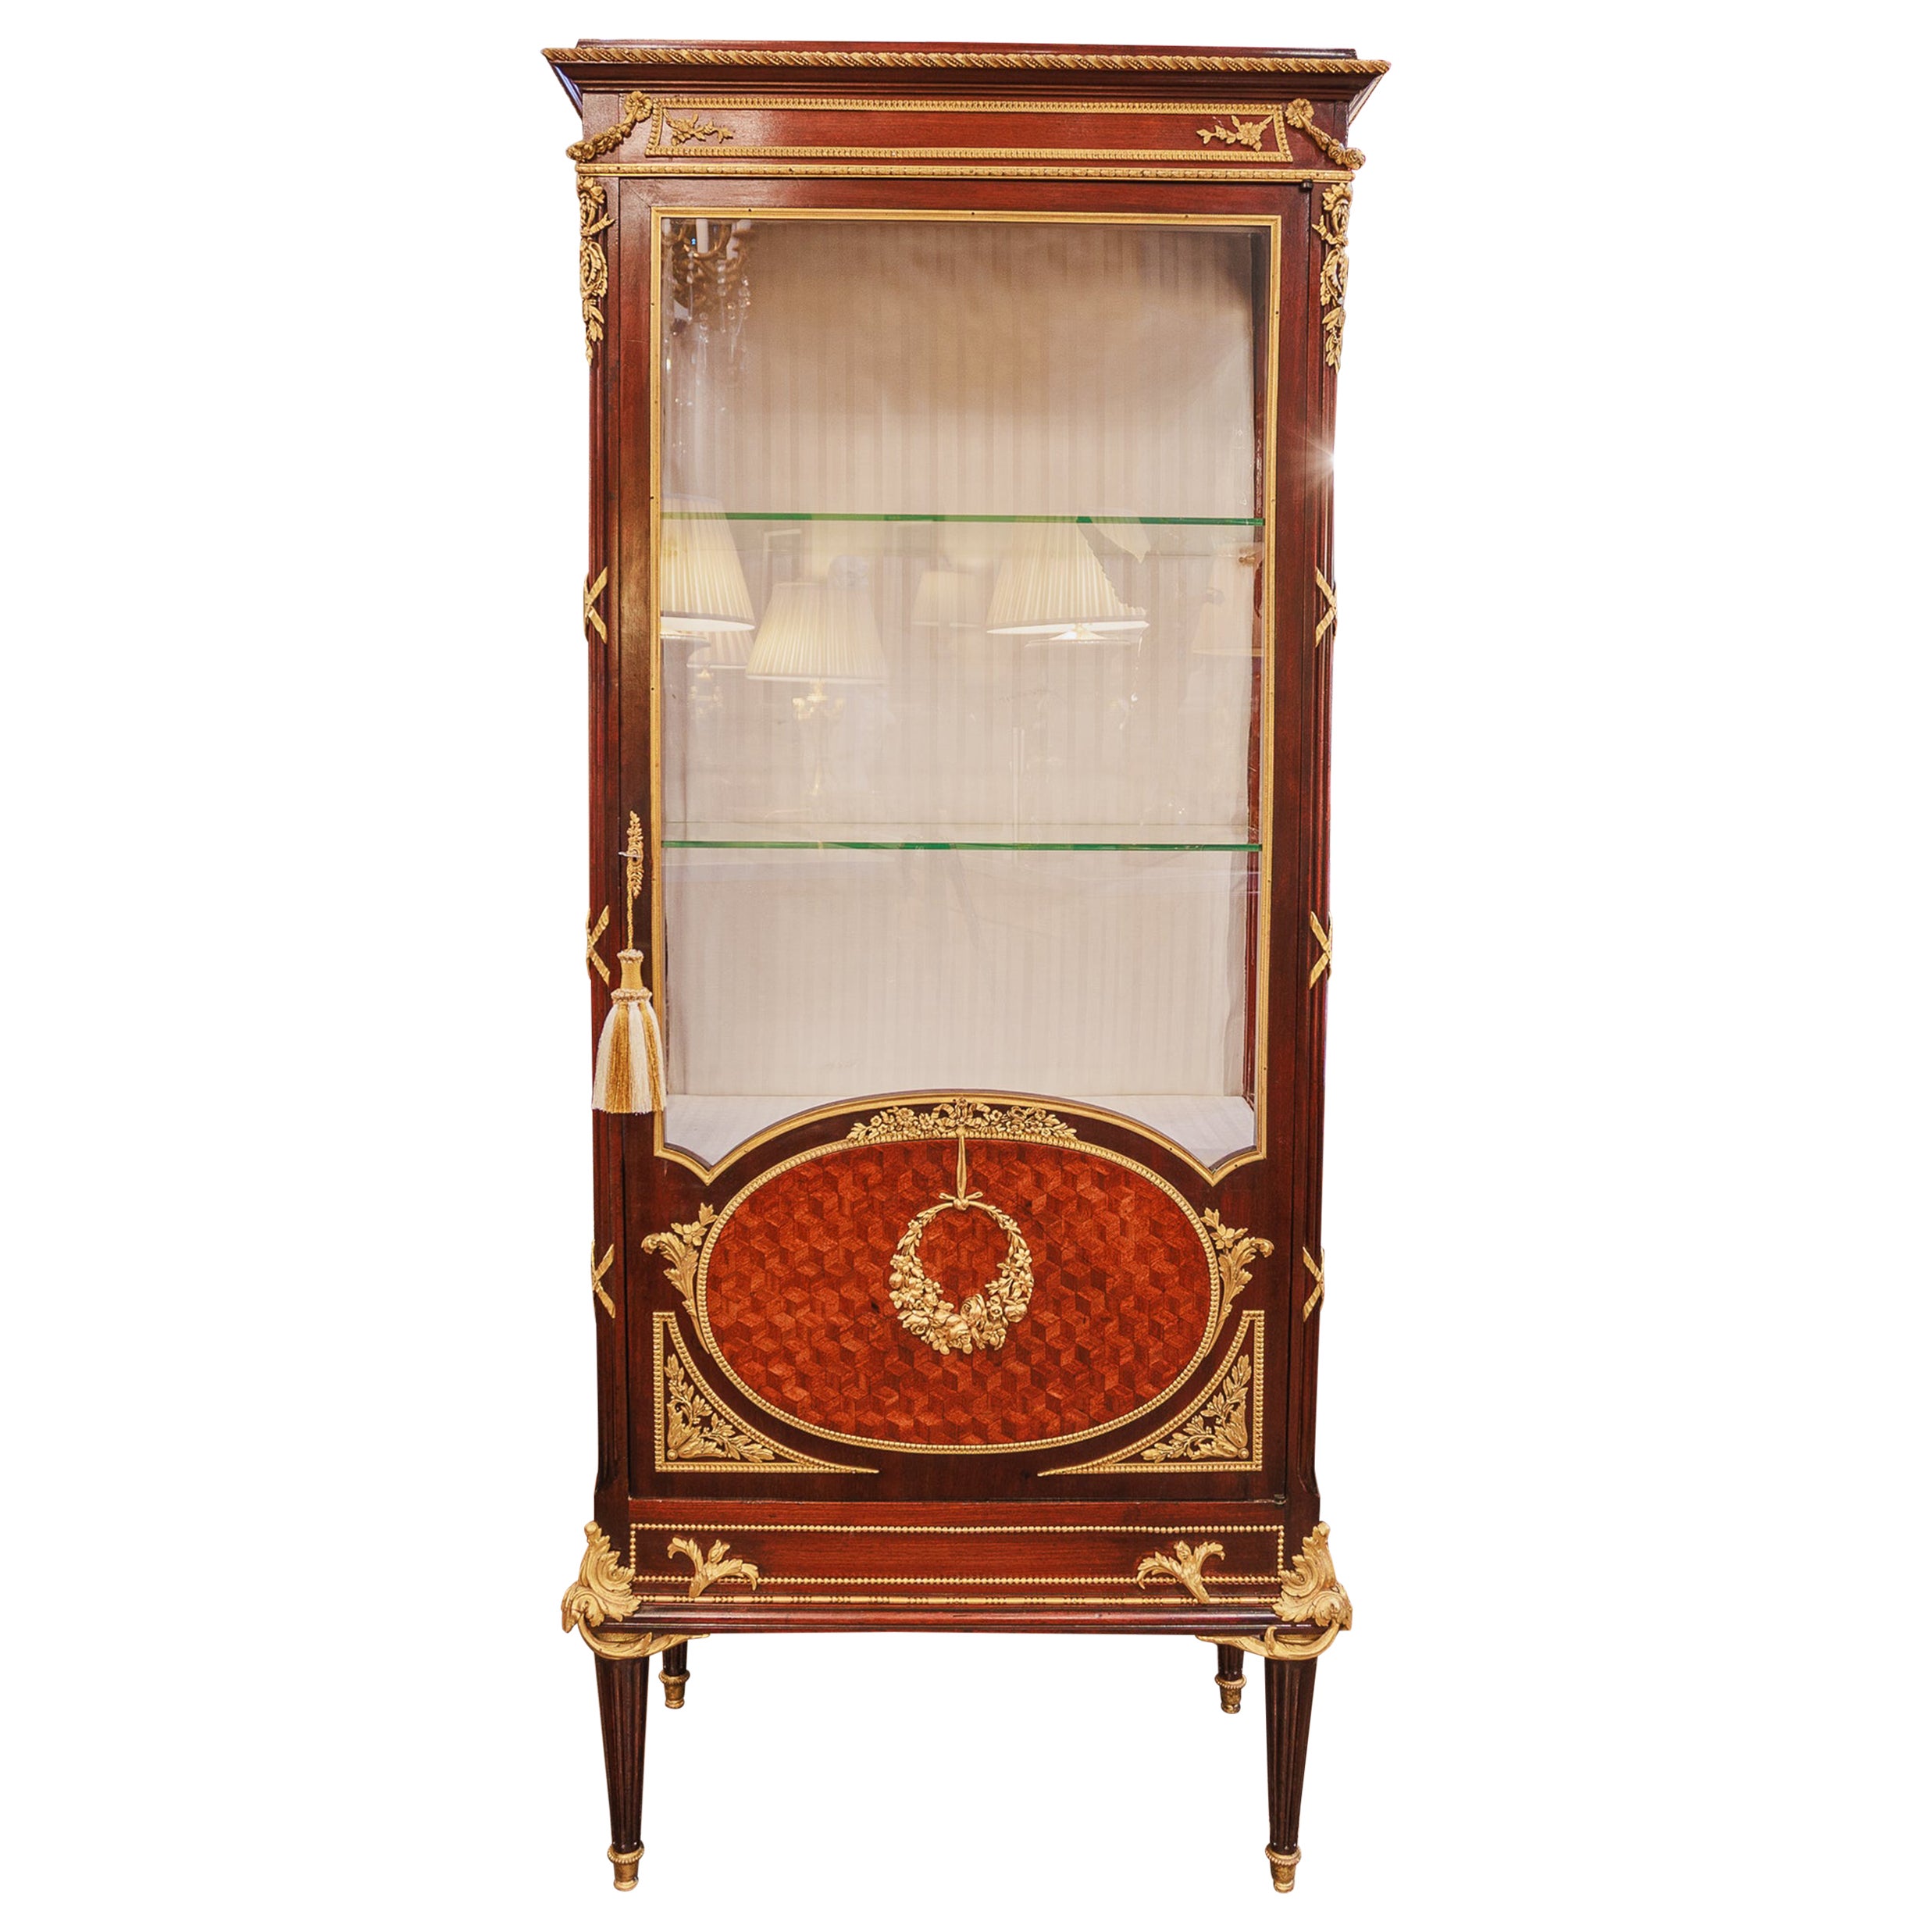 A fine 19th century French Louis XVI kingwood parquetry and gilt bronze vitrine 